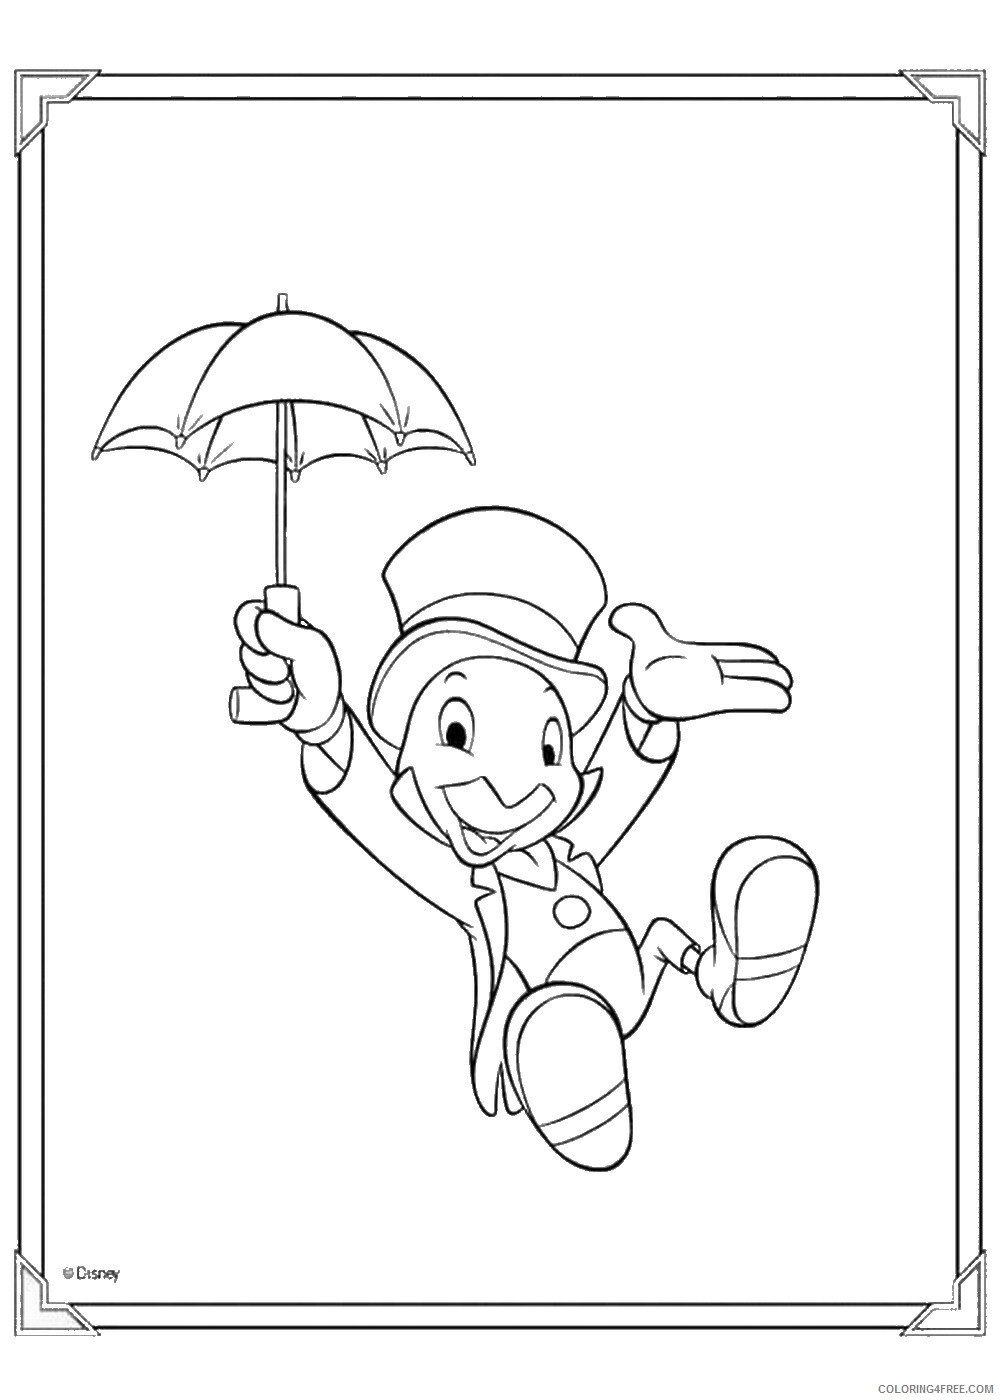 Pinocchio Coloring Pages TV Film Pinocchio_coloring_17 Printable 2020 06329 Coloring4free